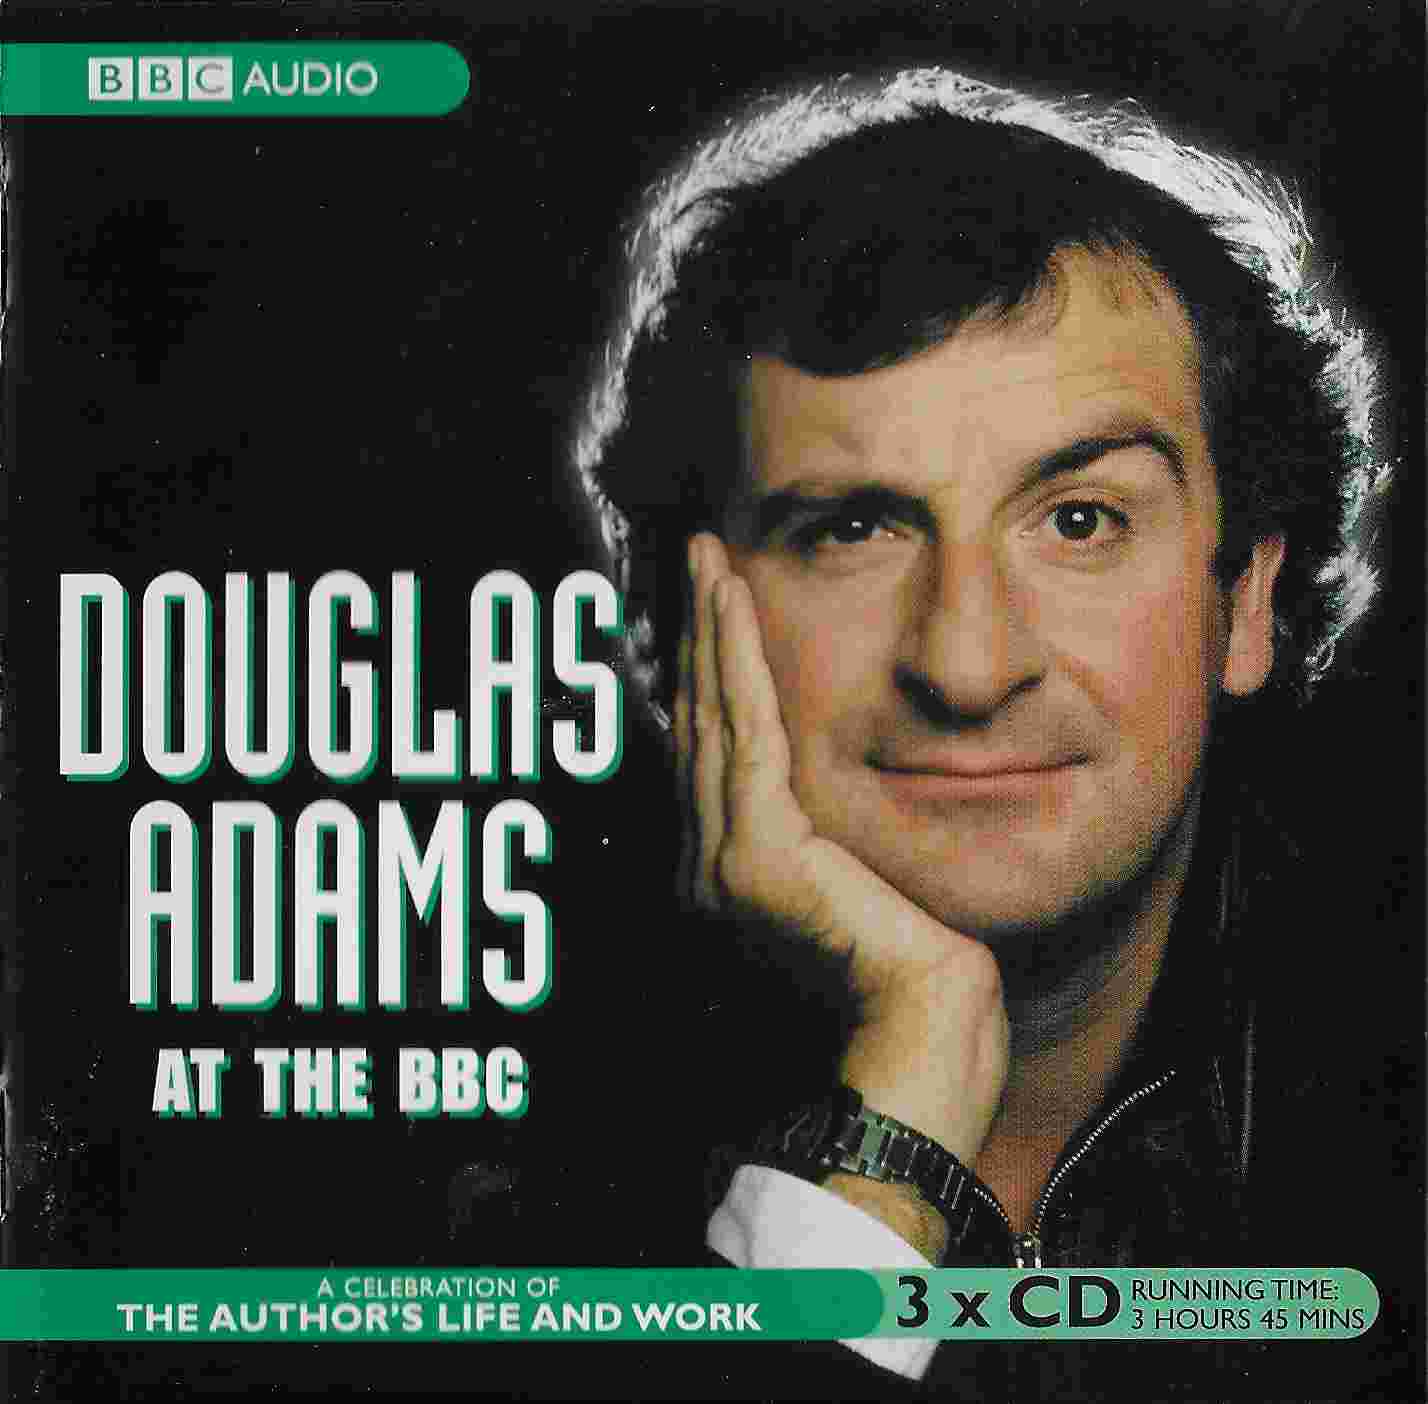 Picture of Douglas Adams at the BBC by artist Various from the BBC cds - Records and Tapes library